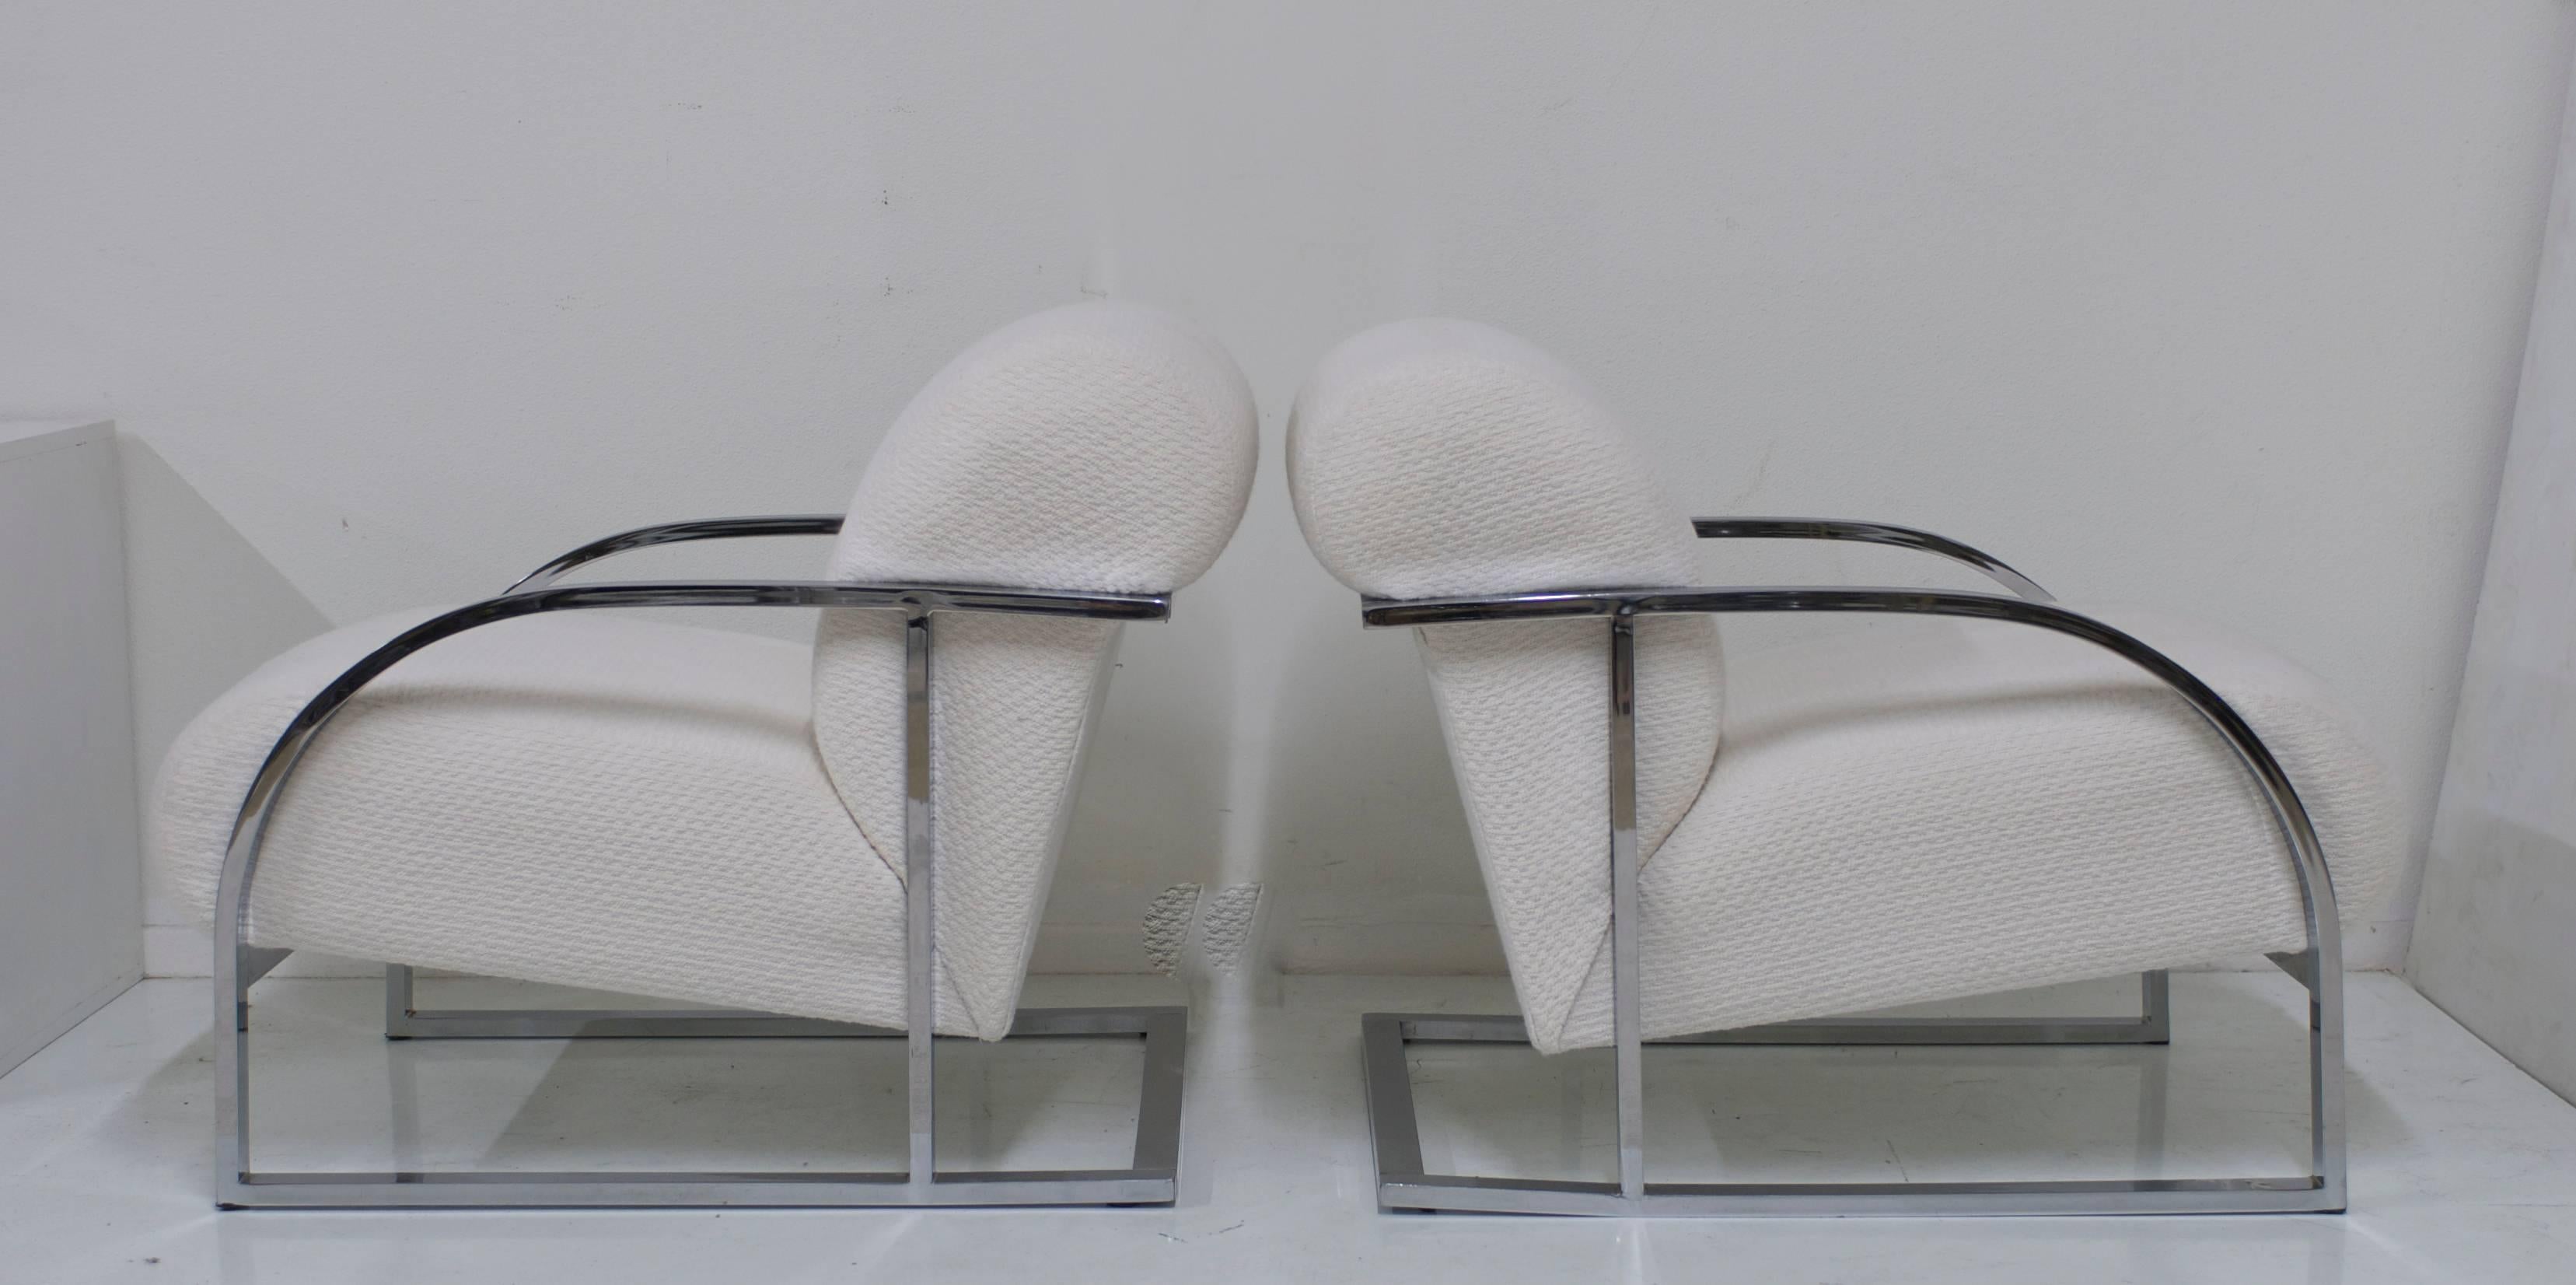 Attributed to Milo Baughman this pair of generously scaled and very comfortable pair of lounge chairs have an elegant curve to the arm. The frame is made of polished chrome. The upholstery is an ivory chenille which has been re-upholstered in the